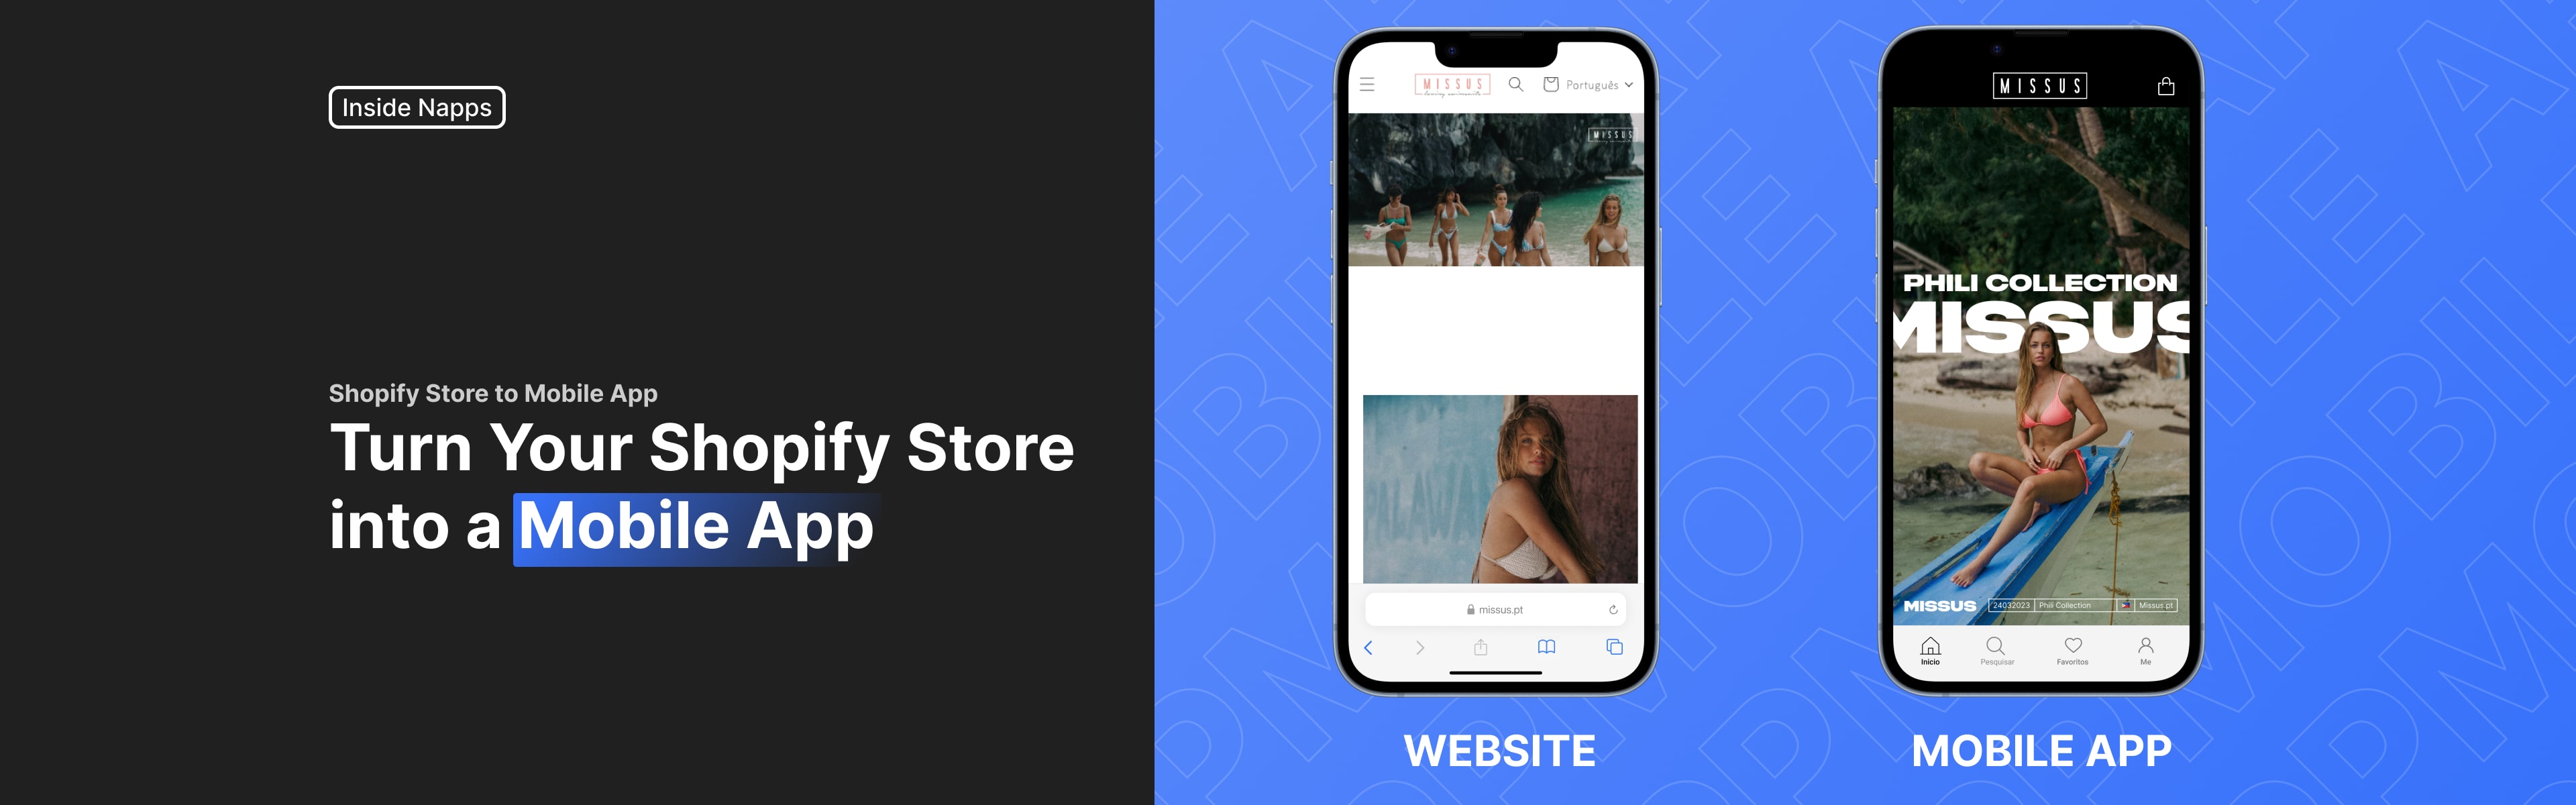 Turn Your Shopify Store into a Mobile App: Boost Your Business